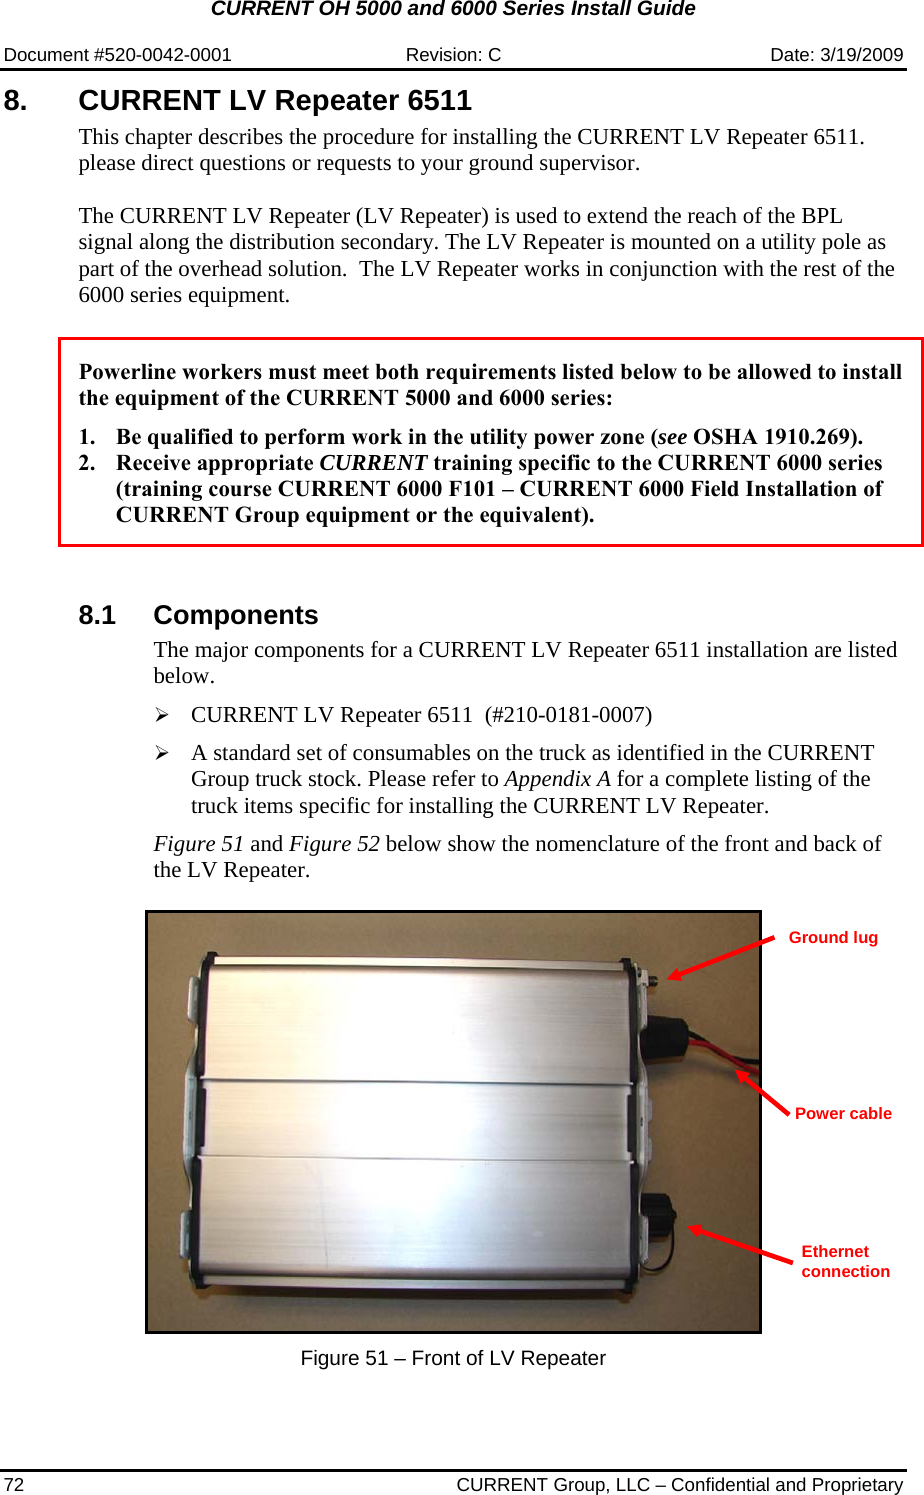 CURRENT OH 5000 and 6000 Series Install Guide  Document #520-0042-0001  Revision: C  Date: 3/19/2009 72  CURRENT Group, LLC – Confidential and Proprietary 8. CURRENT LV Repeater 6511 This chapter describes the procedure for installing the CURRENT LV Repeater 6511. please direct questions or requests to your ground supervisor.  The CURRENT LV Repeater (LV Repeater) is used to extend the reach of the BPL signal along the distribution secondary. The LV Repeater is mounted on a utility pole as part of the overhead solution.  The LV Repeater works in conjunction with the rest of the 6000 series equipment.   Powerline workers must meet both requirements listed below to be allowed to install the equipment of the CURRENT 5000 and 6000 series:  1. Be qualified to perform work in the utility power zone (see OSHA 1910.269). 2. Receive appropriate CURRENT training specific to the CURRENT 6000 series (training course CURRENT 6000 F101 – CURRENT 6000 Field Installation of CURRENT Group equipment or the equivalent).    8.1 Components The major components for a CURRENT LV Repeater 6511 installation are listed below.  ¾ CURRENT LV Repeater 6511  (#210-0181-0007)  ¾ A standard set of consumables on the truck as identified in the CURRENT Group truck stock. Please refer to Appendix A for a complete listing of the truck items specific for installing the CURRENT LV Repeater.   Figure 51 and Figure 52 below show the nomenclature of the front and back of the LV Repeater.     Figure 51 – Front of LV Repeater  Power cable Ground lug Ethernet connection 